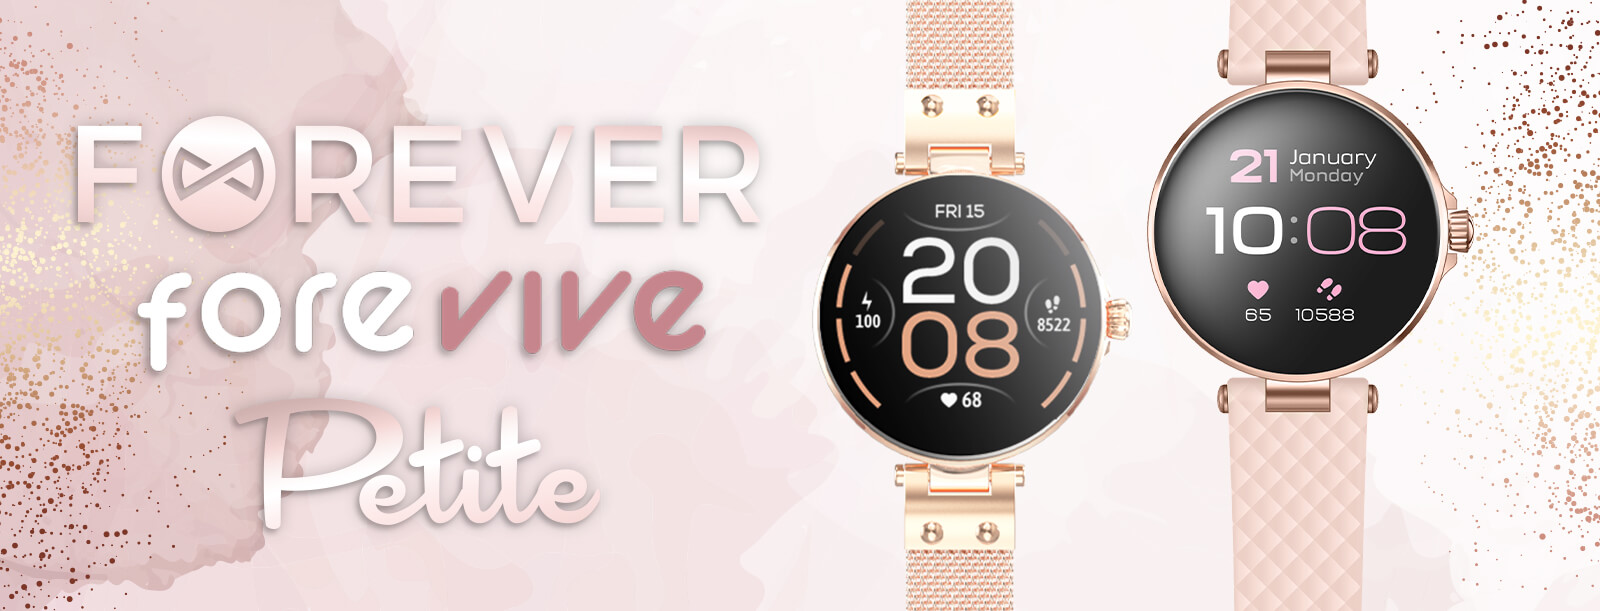 Forever Forevive Petite - kobiecy smartwatch